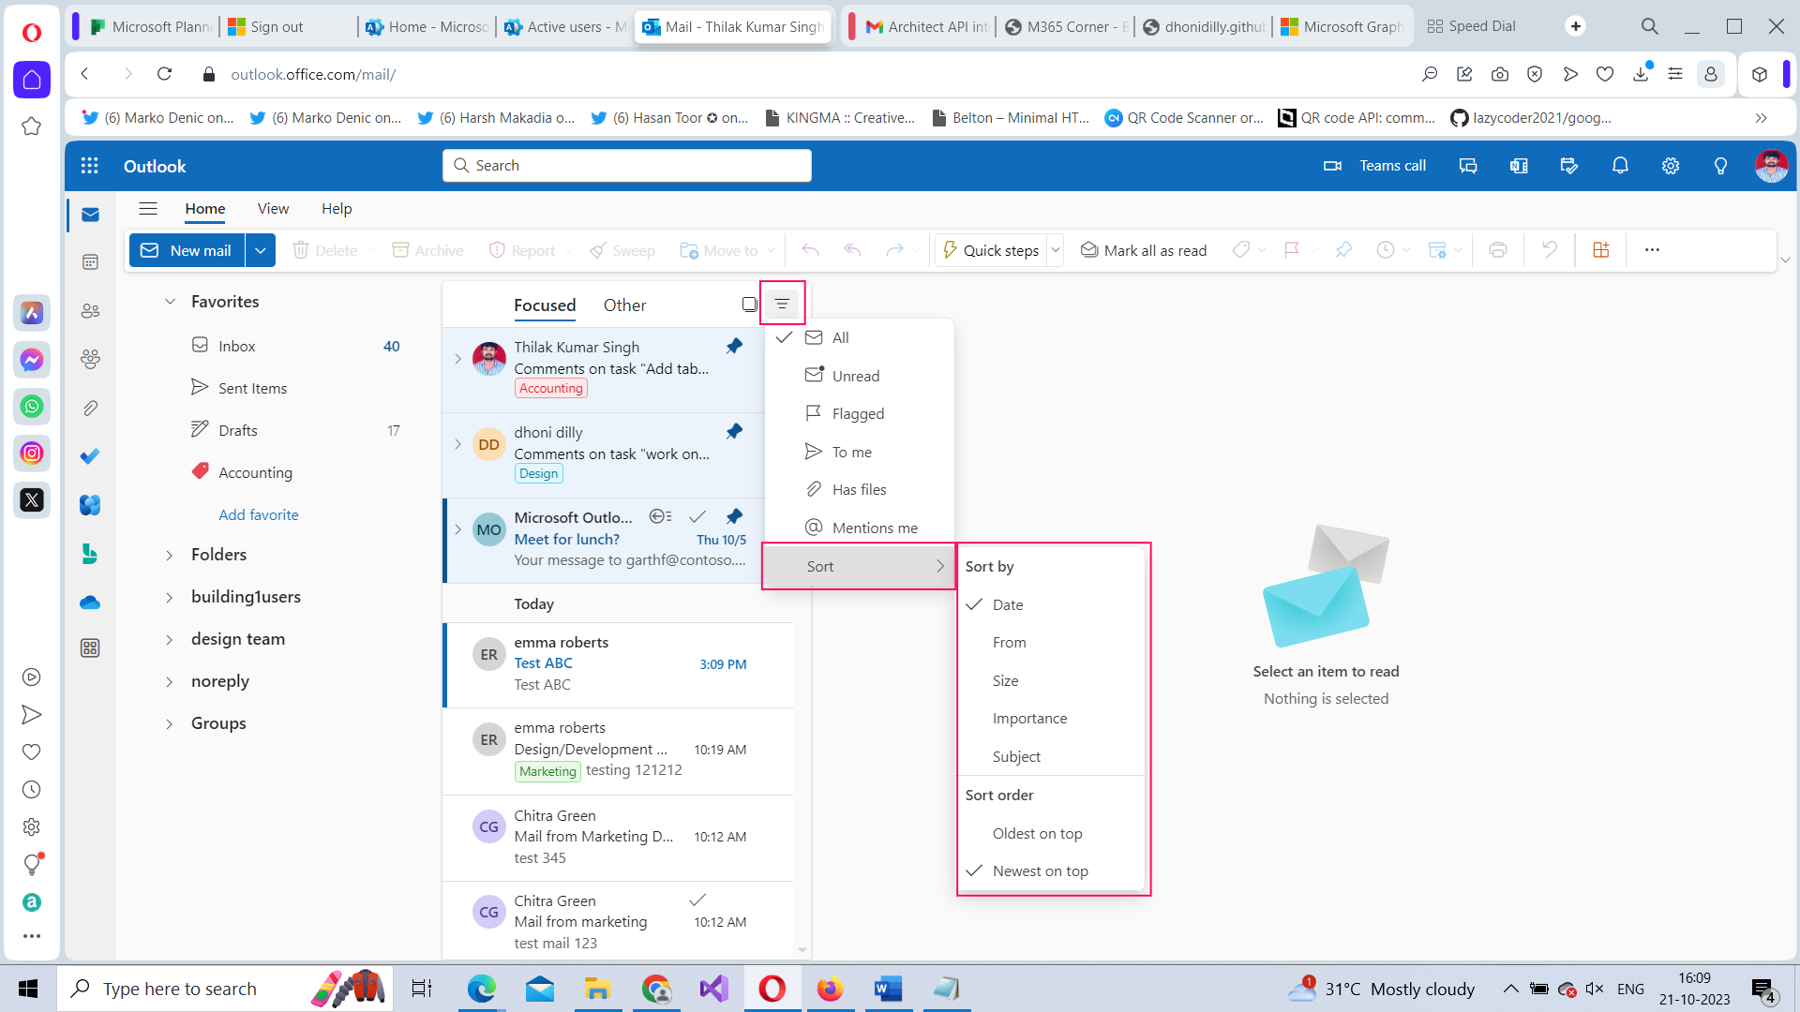 This screenshot shows how you can sort emails using the filter option in Microsoft 365 Outlook on the web.